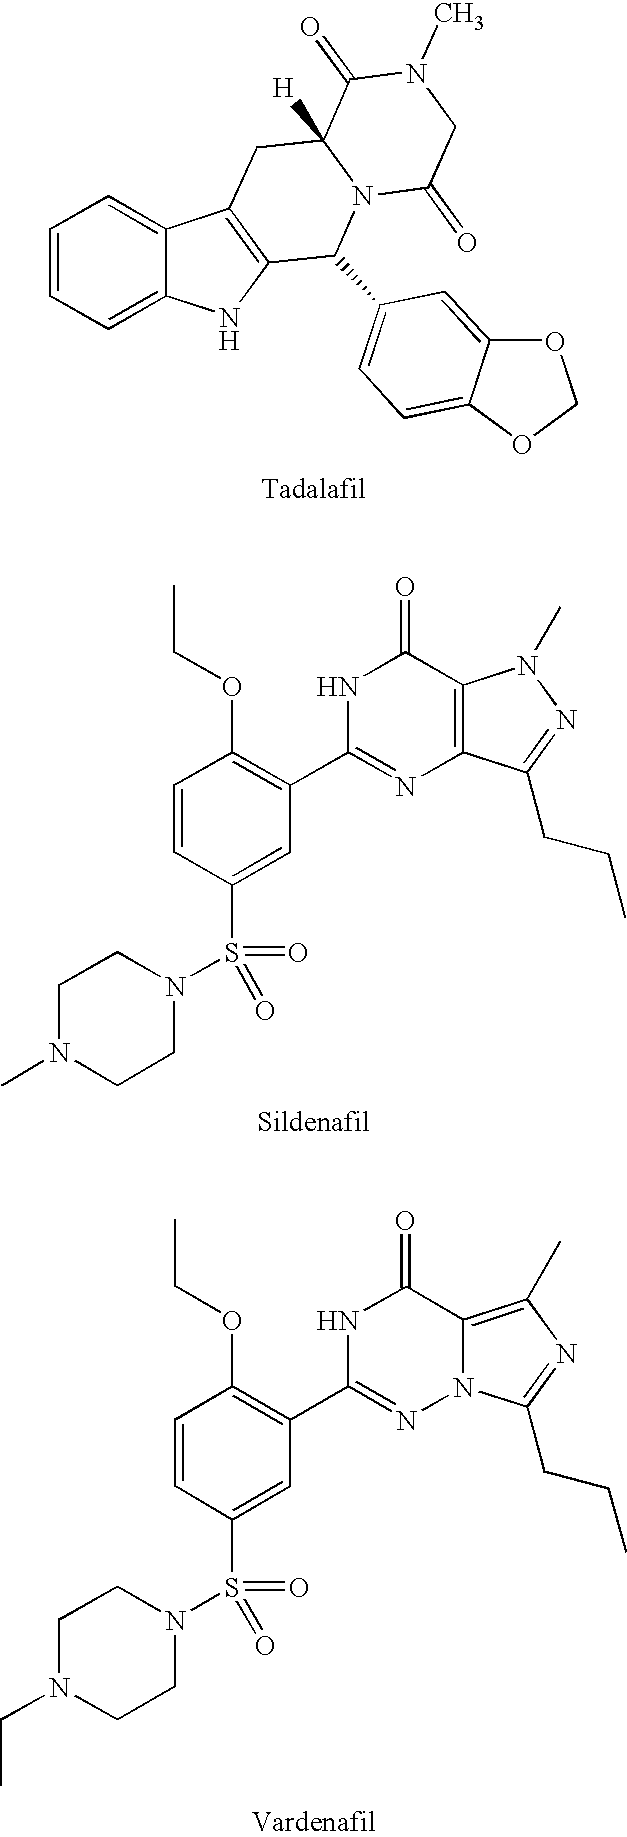 Substituted PDE5 inhibitors